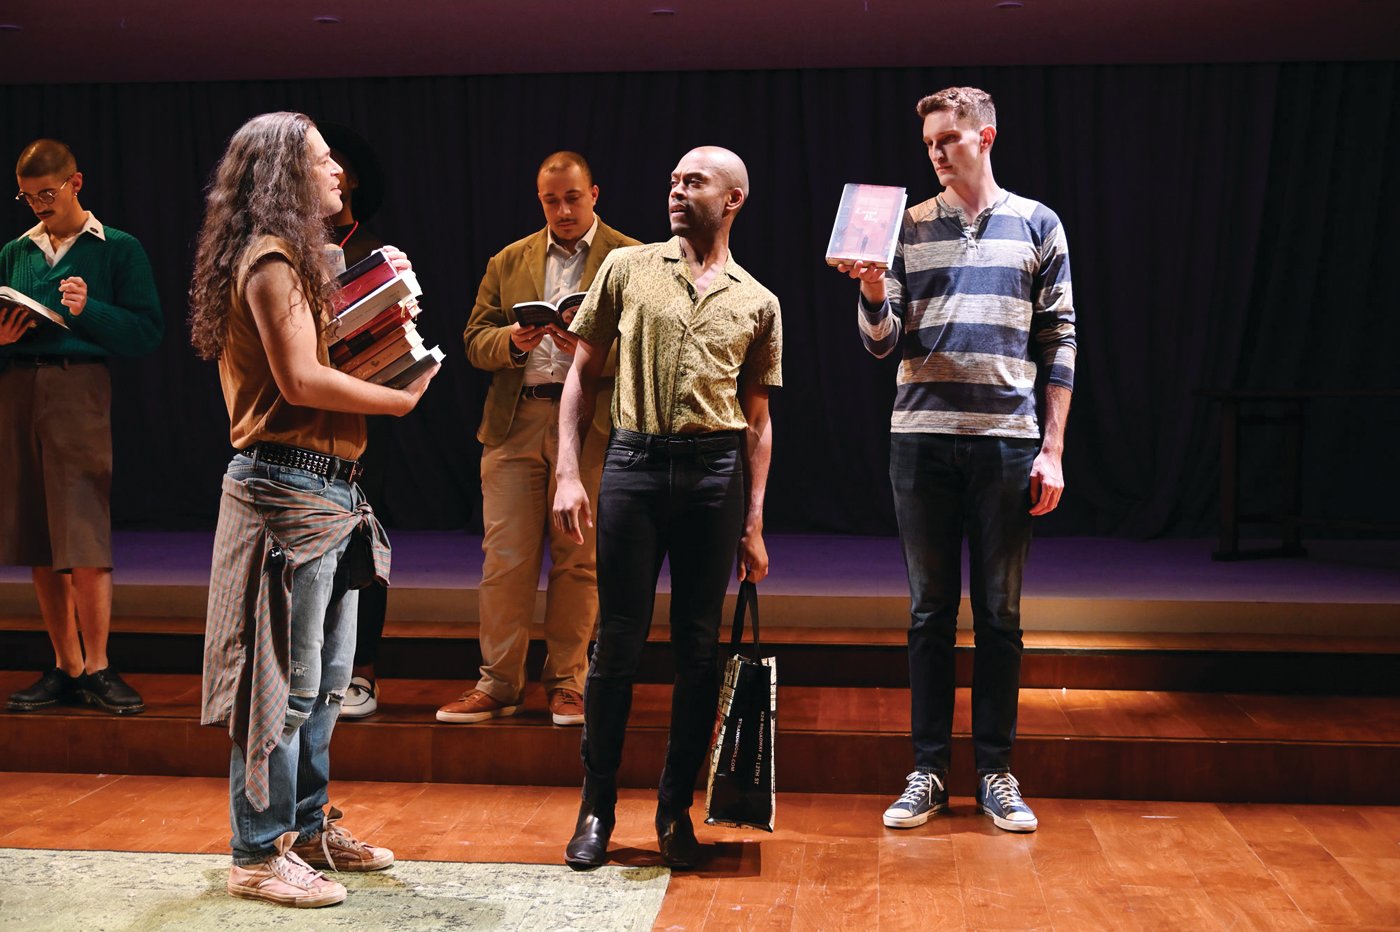 From left: David Mattar Merten as Young Man 7, Chingwe Padraig Sullivan as Leo, Adrian Peguero as Young Man 8, Taavon Gamble as Toby Darling and Ross Barron as Young Man 5 in The Inheritance, Part Two.